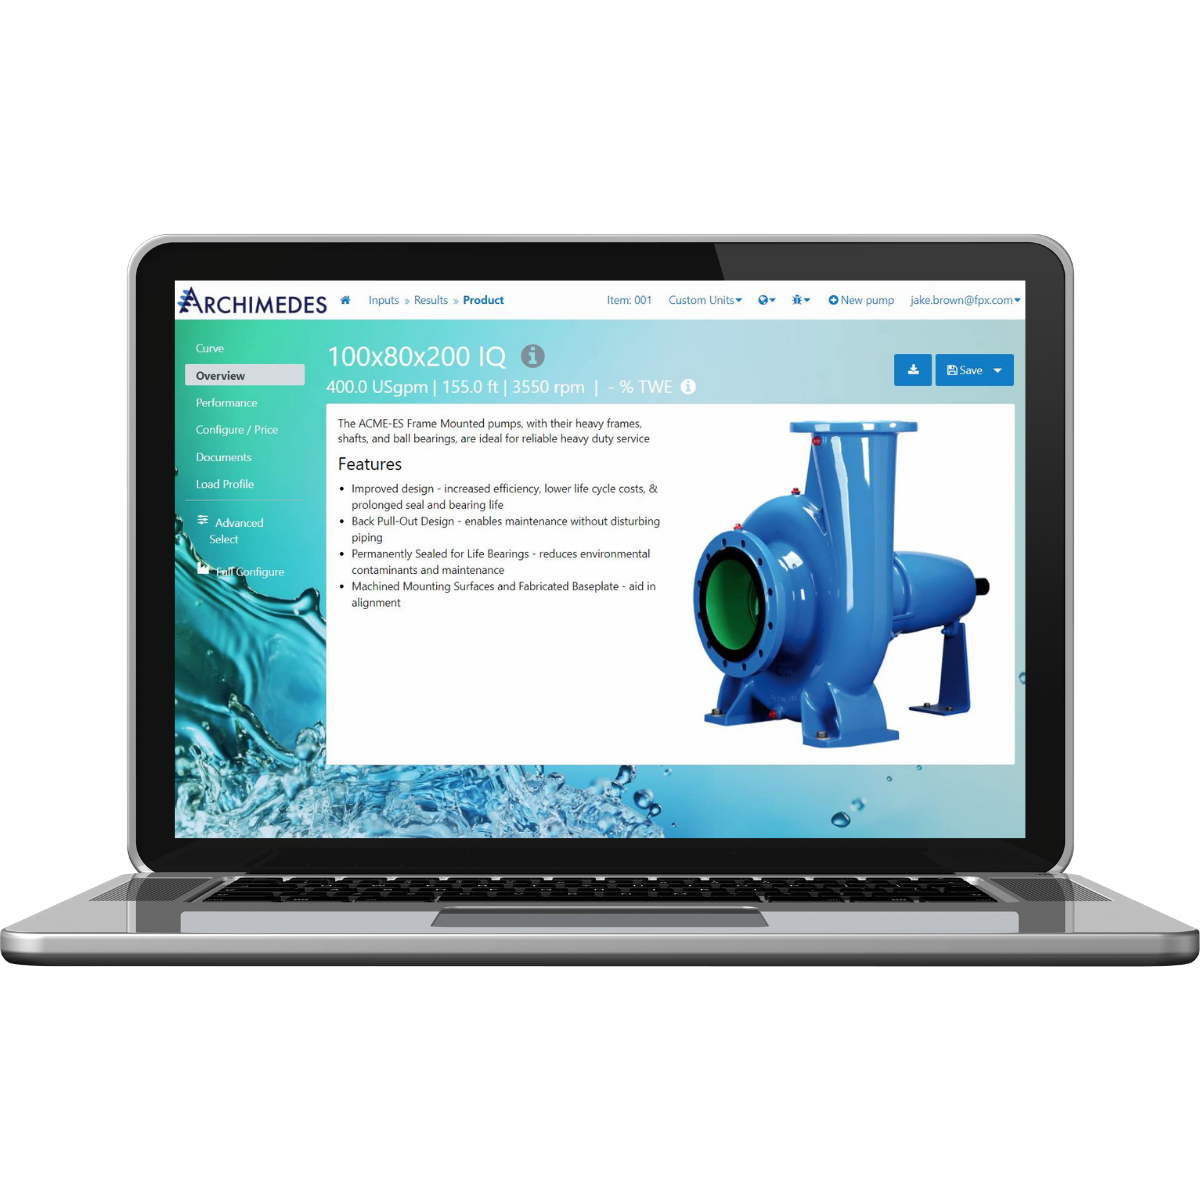 The FPX Intelliquip Selling Cloud enables manufacturers and distributors of pumps and mechanical equipment to rapidly select, configure, price and quote complex, engineered products.